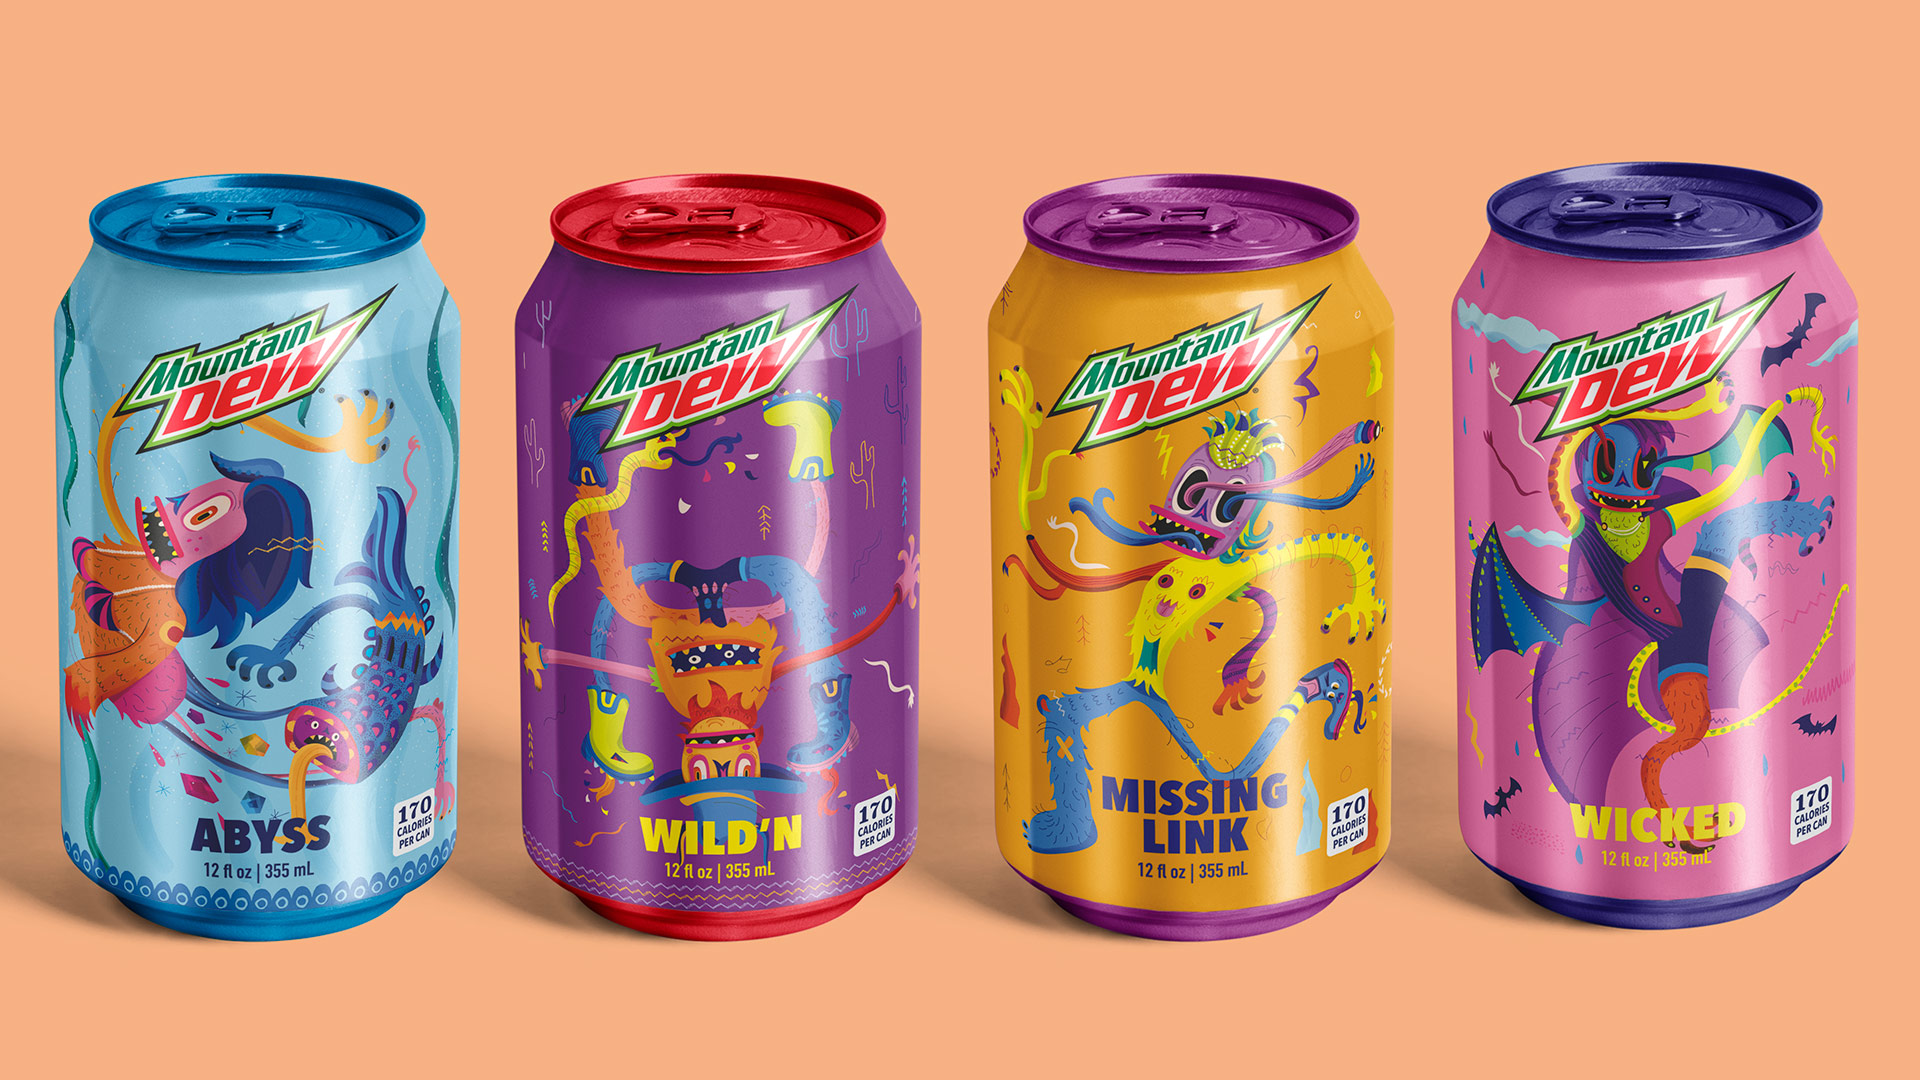 This award winning student illustration and design project for Mountain Dew Flavors has colorful imaginary mythical monster illustrations. The Mountain Dew drink cans have a unique packaging design as it includes fun and crazy illustrations and colorful aluminum can tops. The drink flavors have unique names that correspond to each creature and relate to the copywriting for their respective posters.